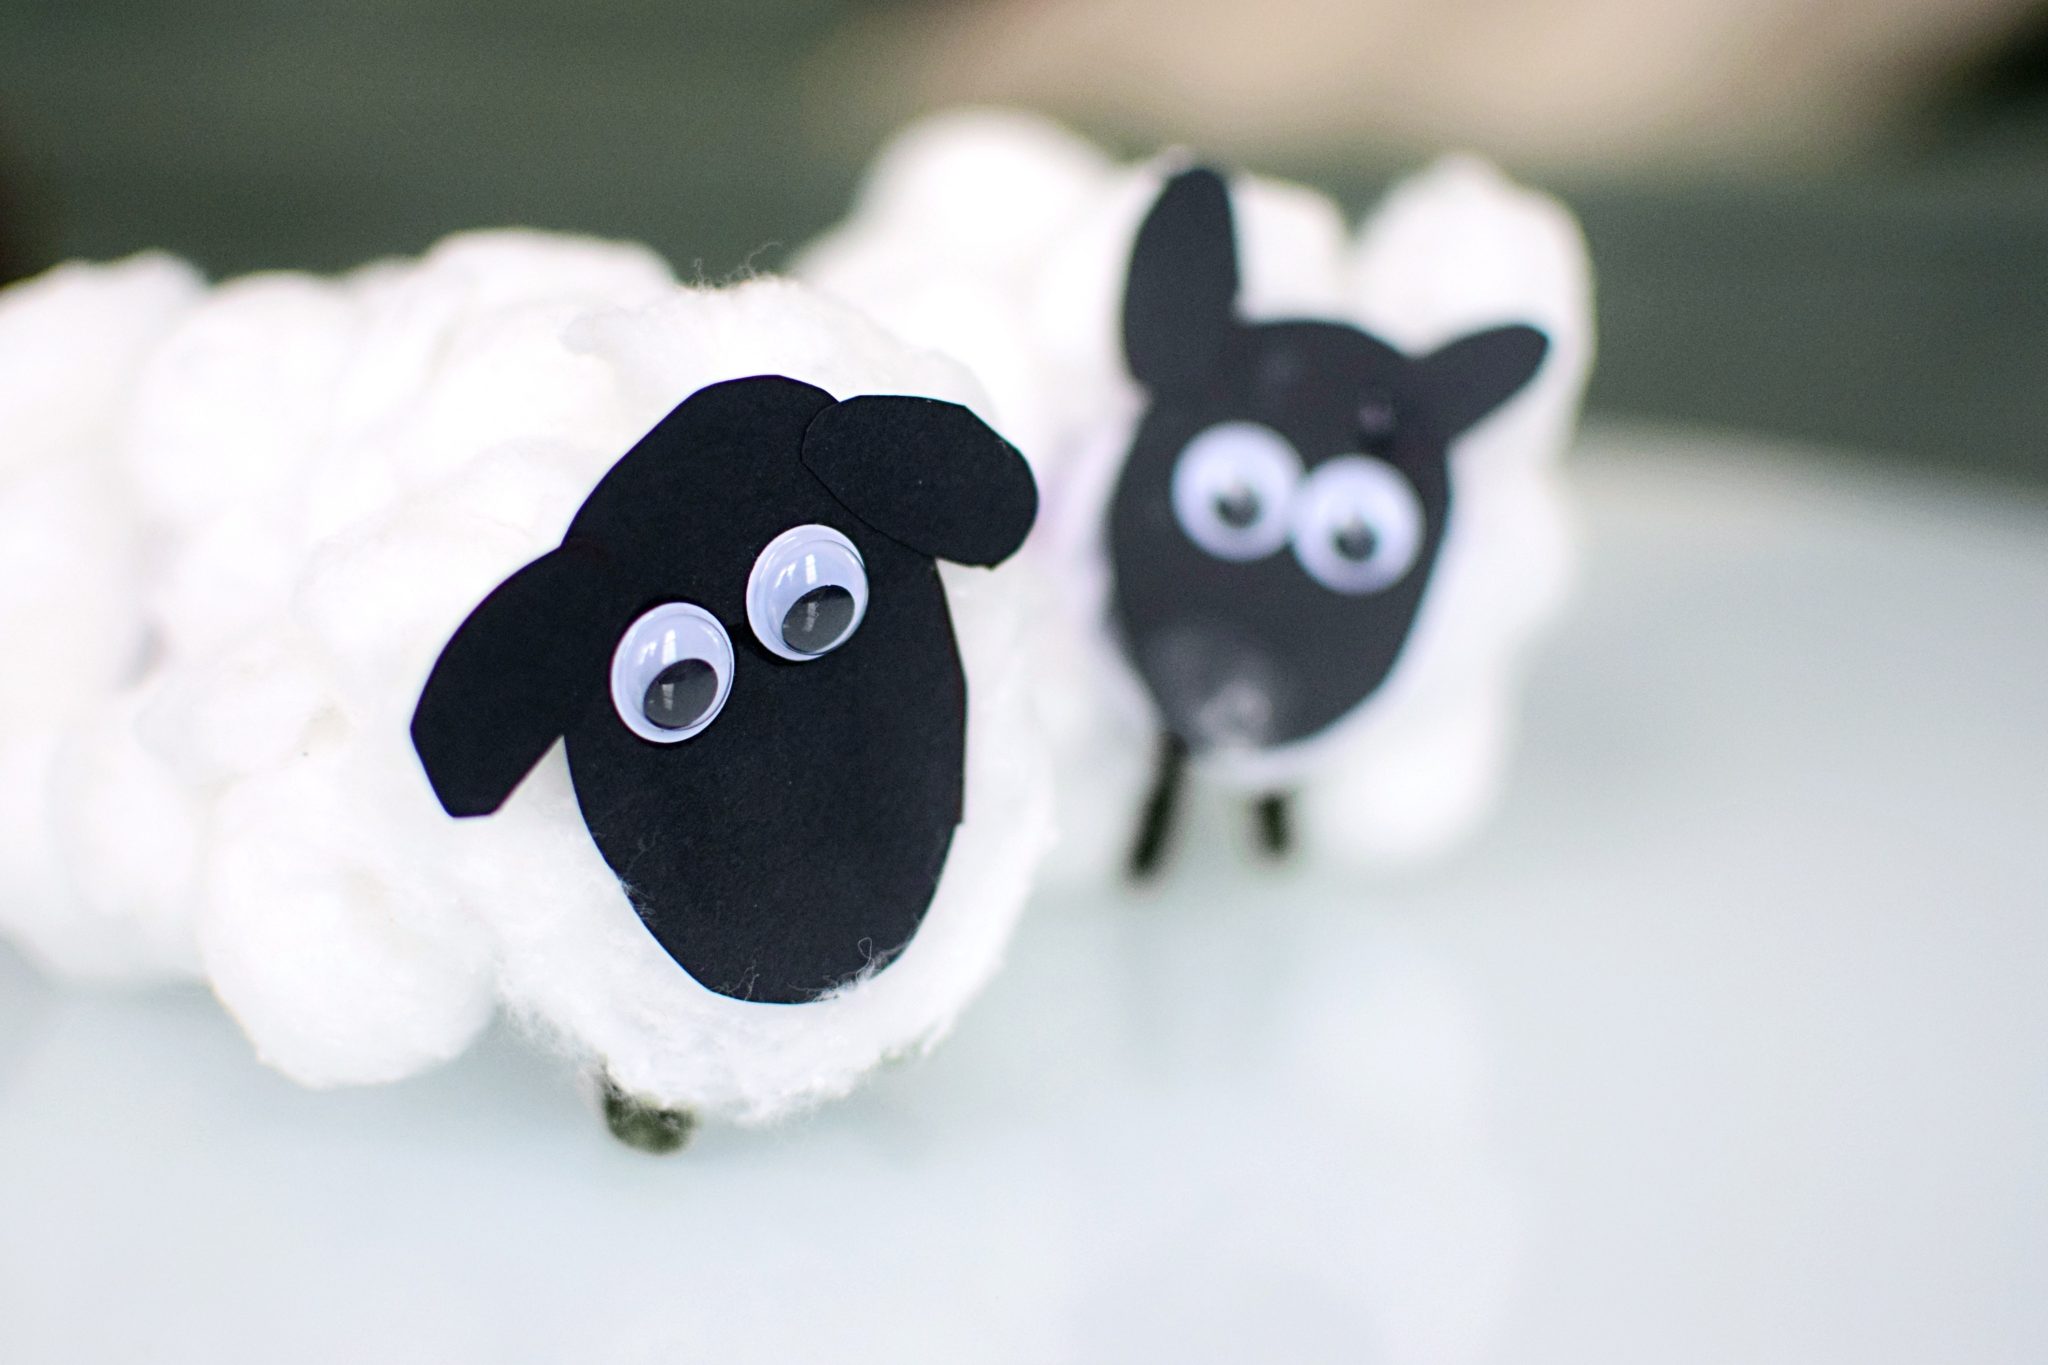 Cotton Ball Sheep Crafts for Kids 2024 - Entertain Your Toddler